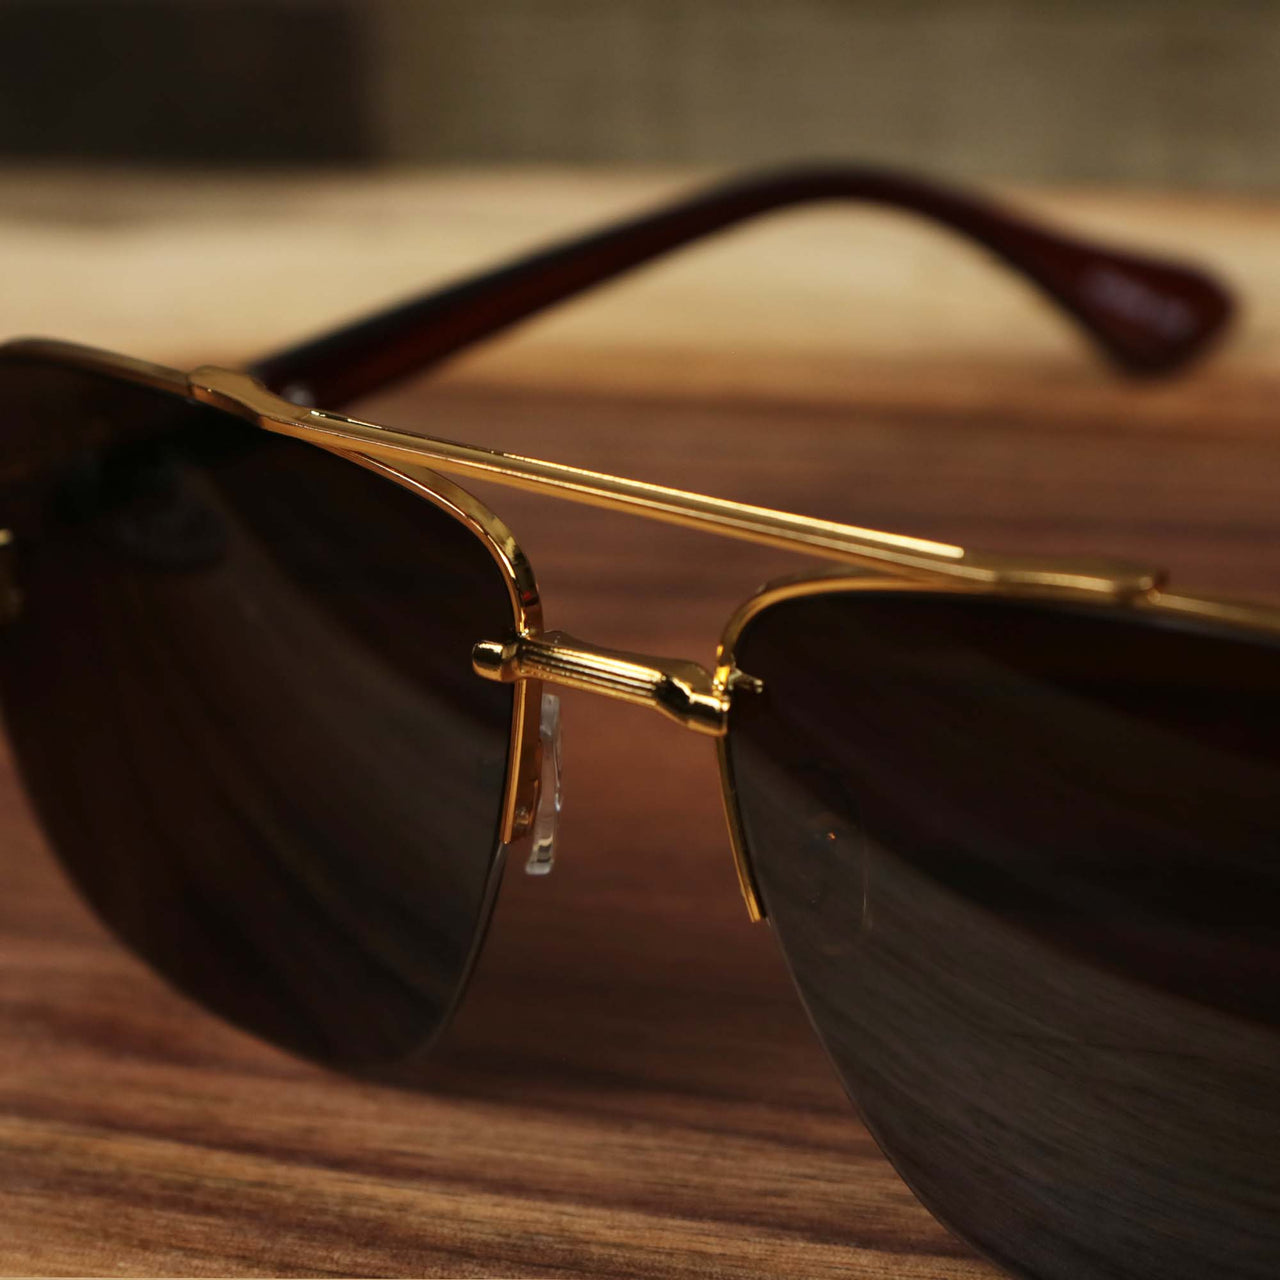 The bridge on the Round Rectangle Frame Black Lens Sunglasses with Gold Frame